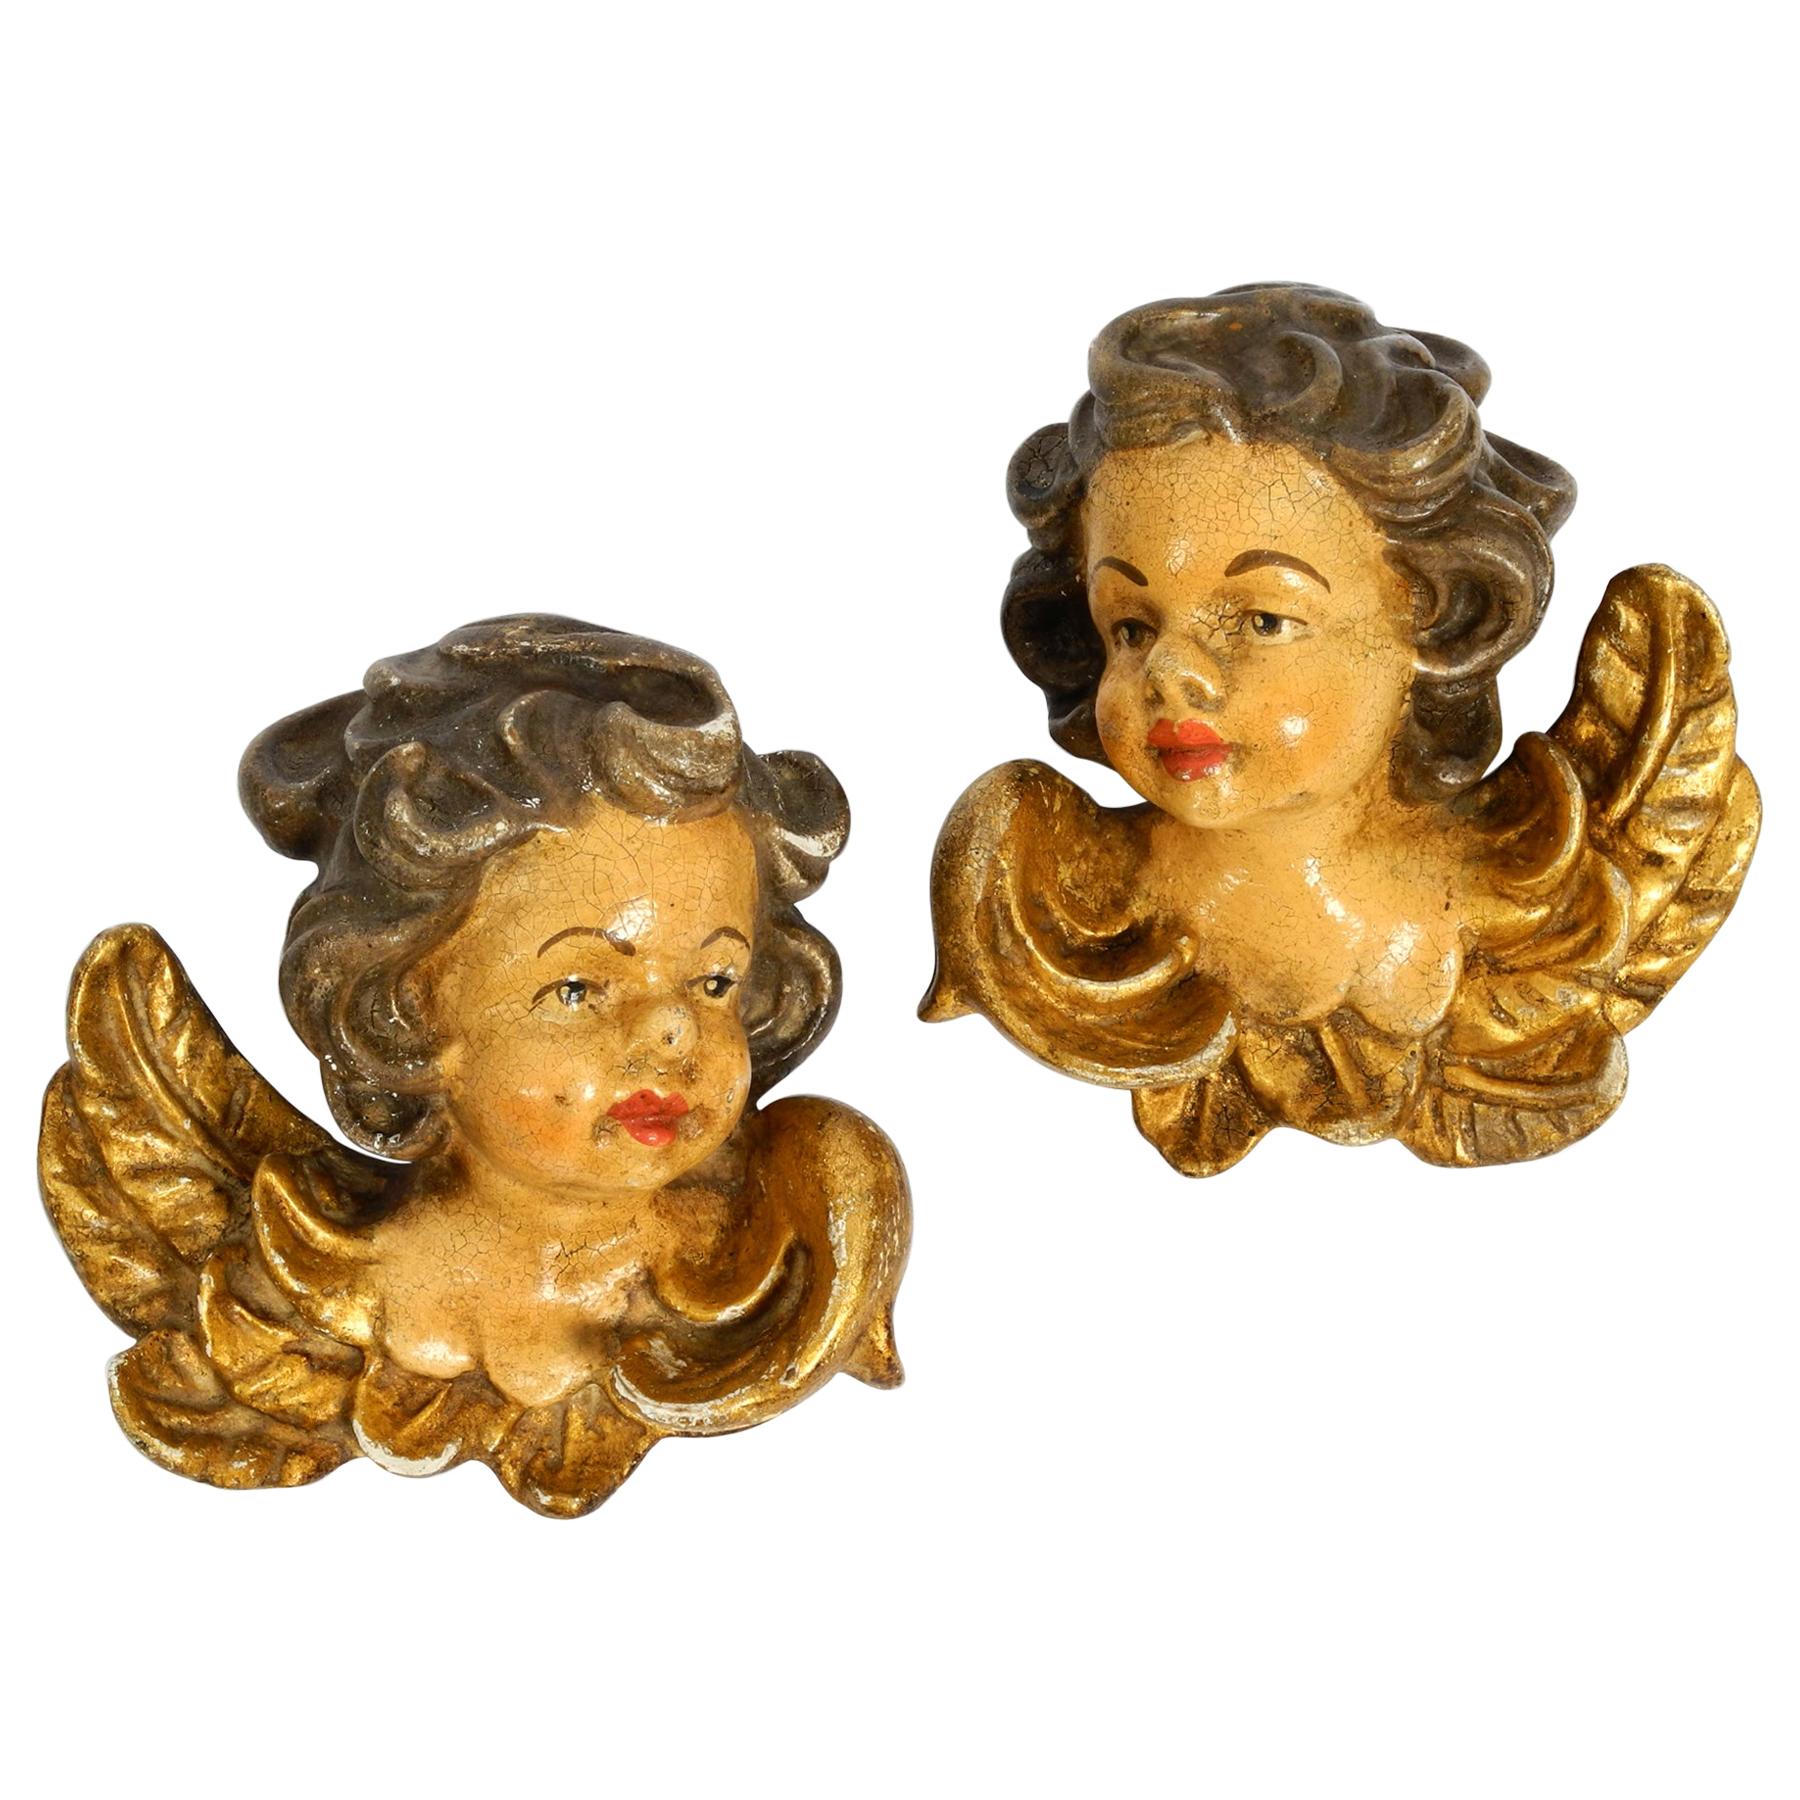 2 Enchanting Little Handmade Italian Wooden Angel Heads from the 1930s to Hang